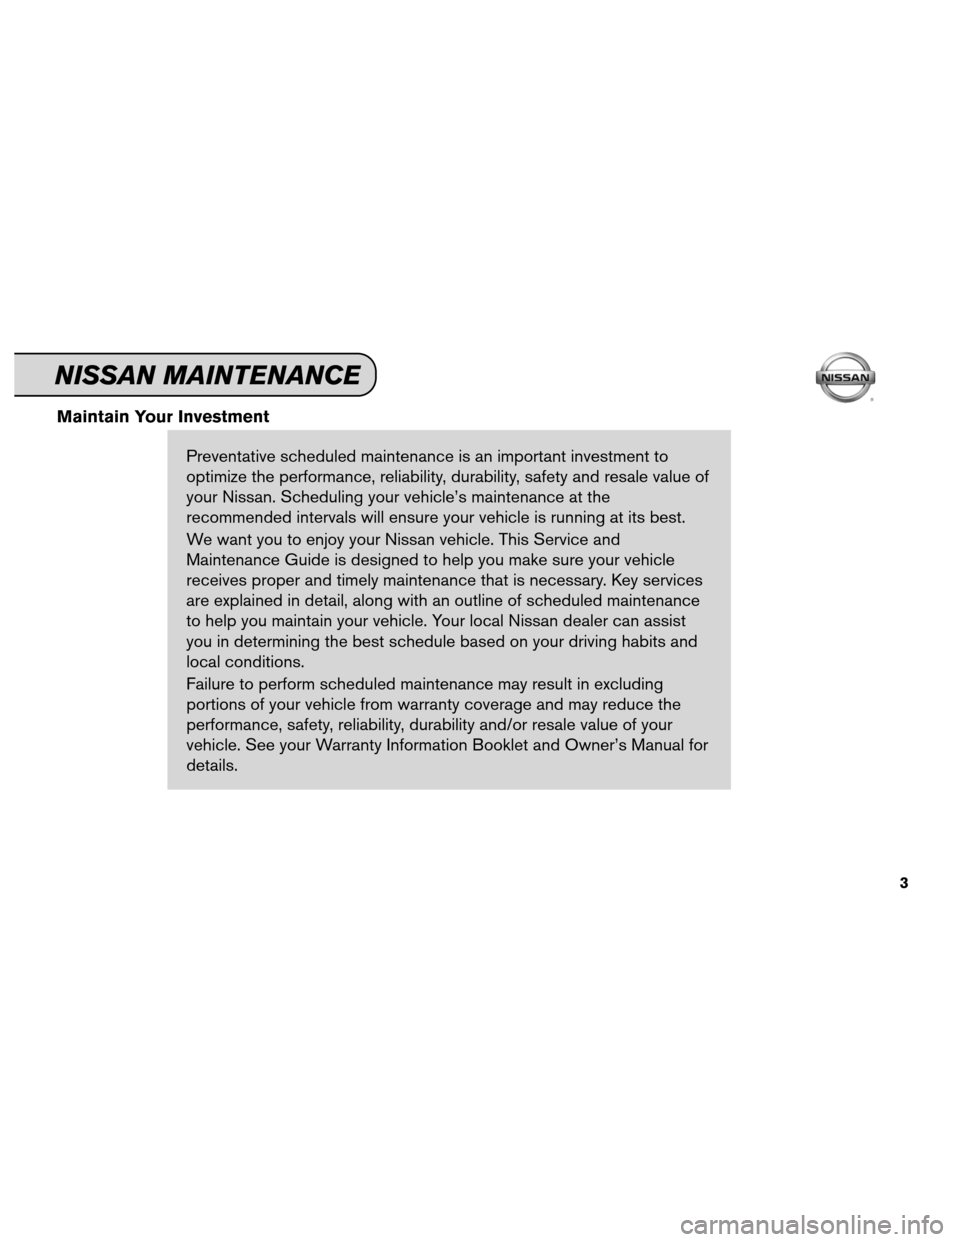 NISSAN NV200 2012 1.G Service And Maintenance Guide Maintain Your InvestmentPreventative scheduled maintenance is an important investment to
optimize the performance, reliability, durability, safety and resale value of
your Nissan. Scheduling your vehi